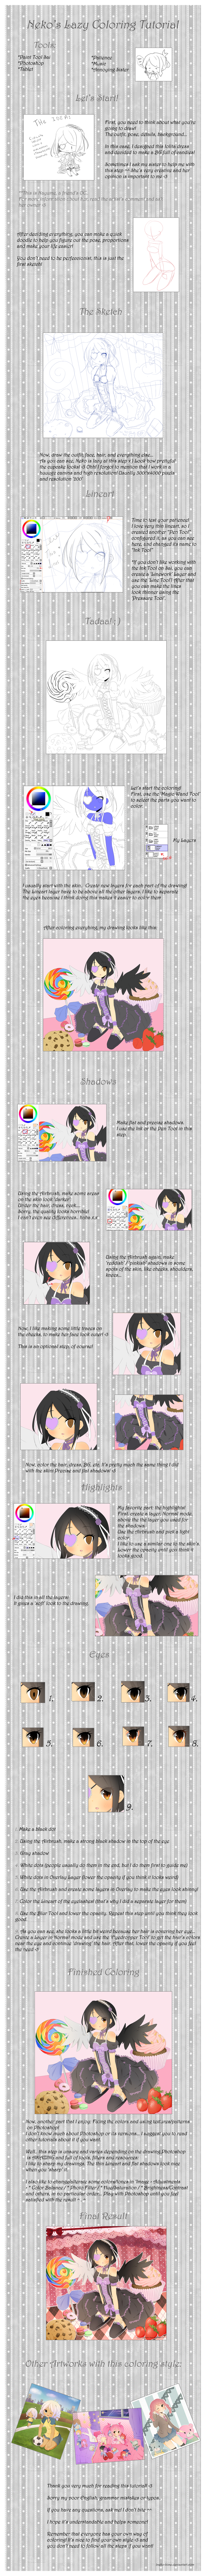 .Lazy Coloring Tutorial.